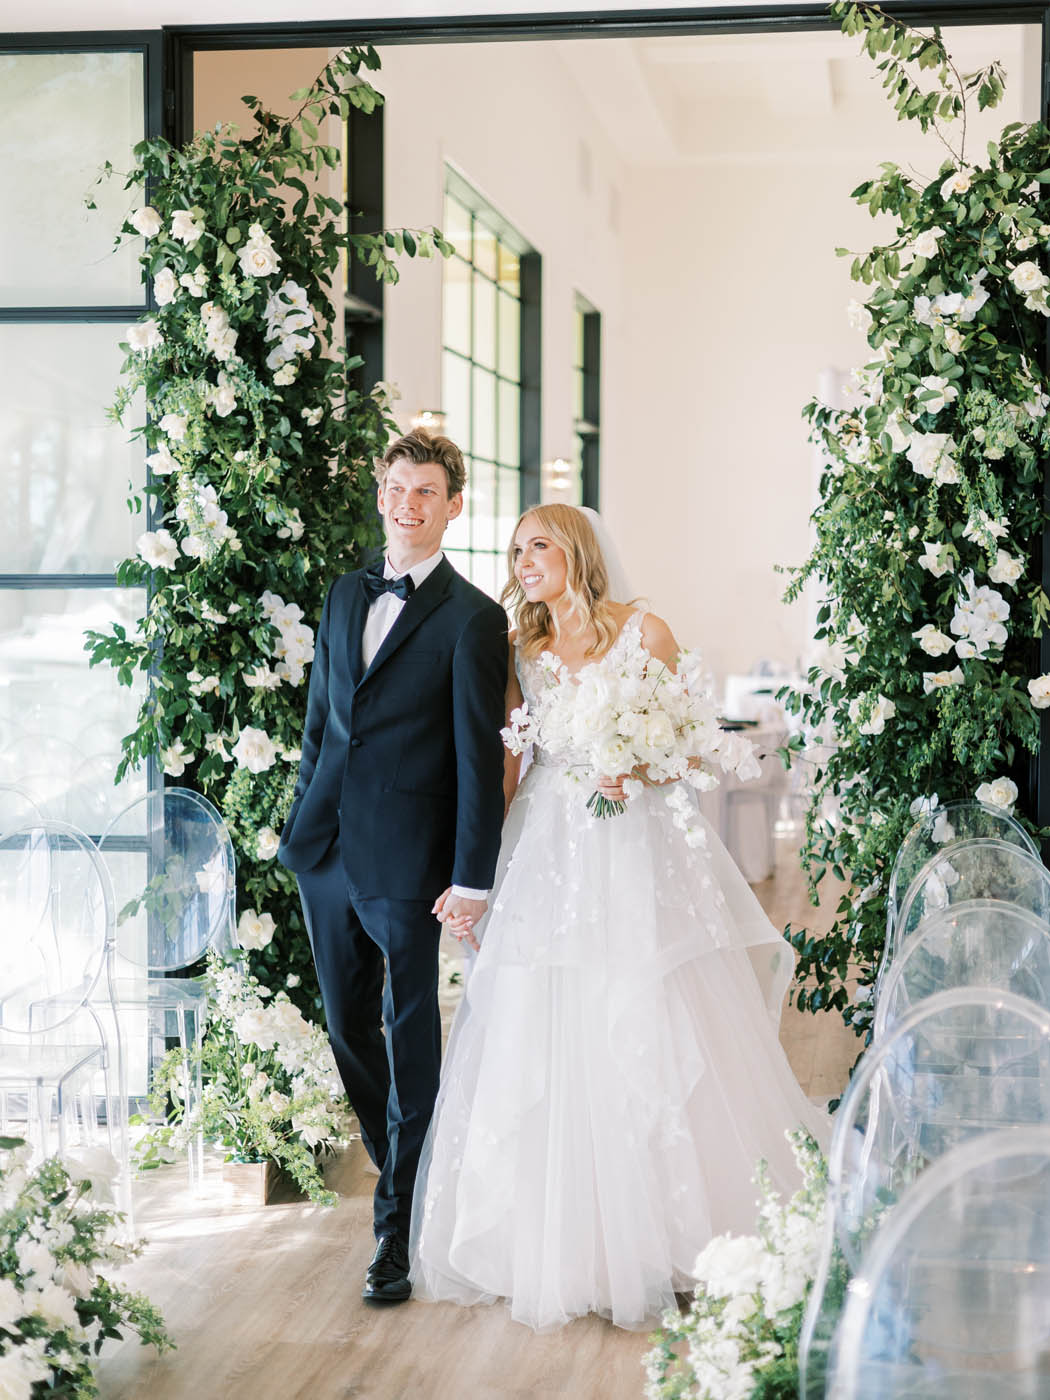 The bride and groom see their modern indoor garden wedding ceremony for the first time